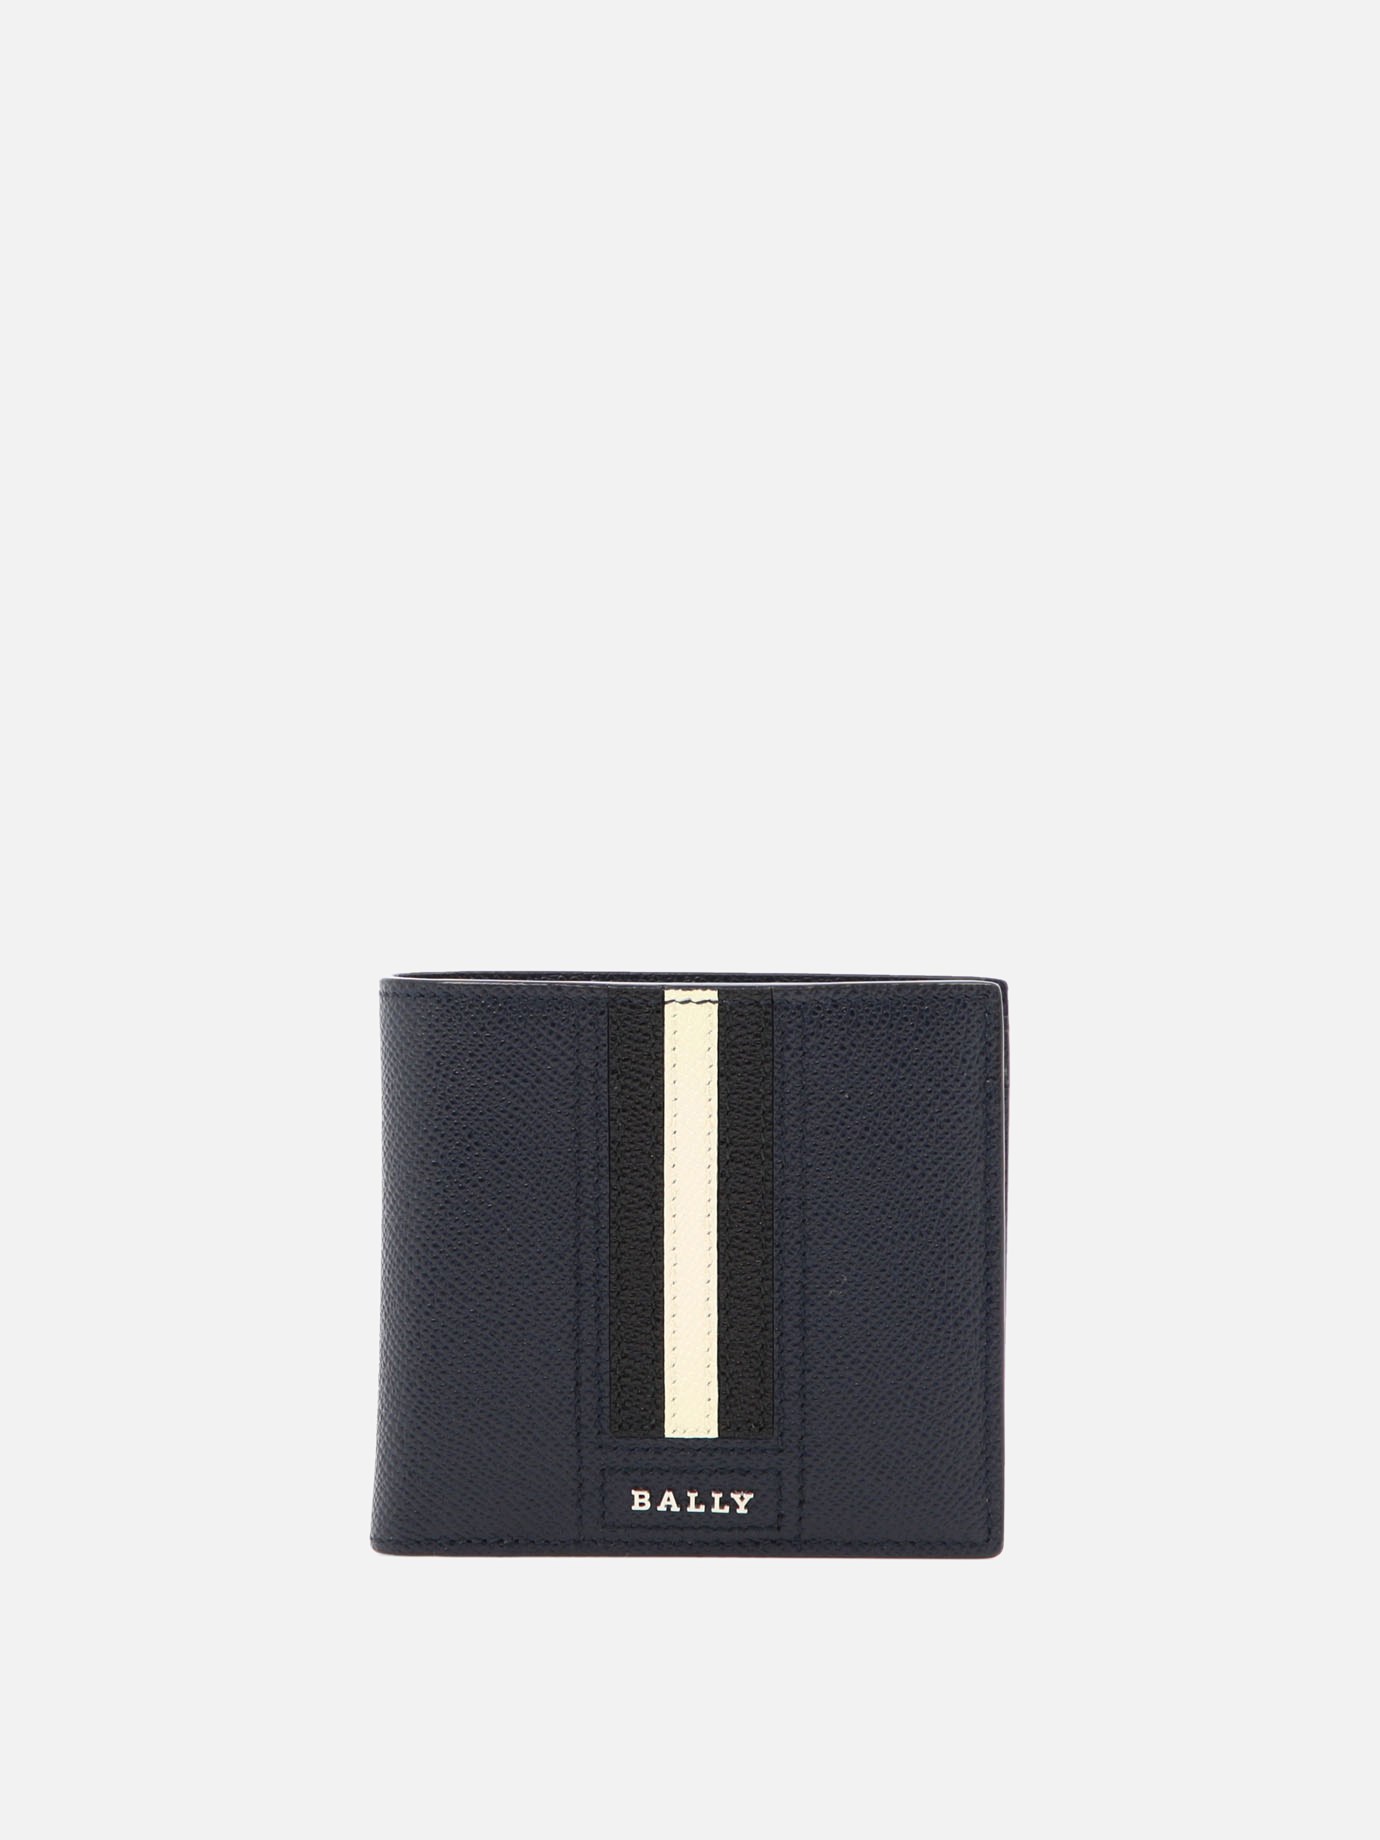  Teisel  walletby Bally - 2